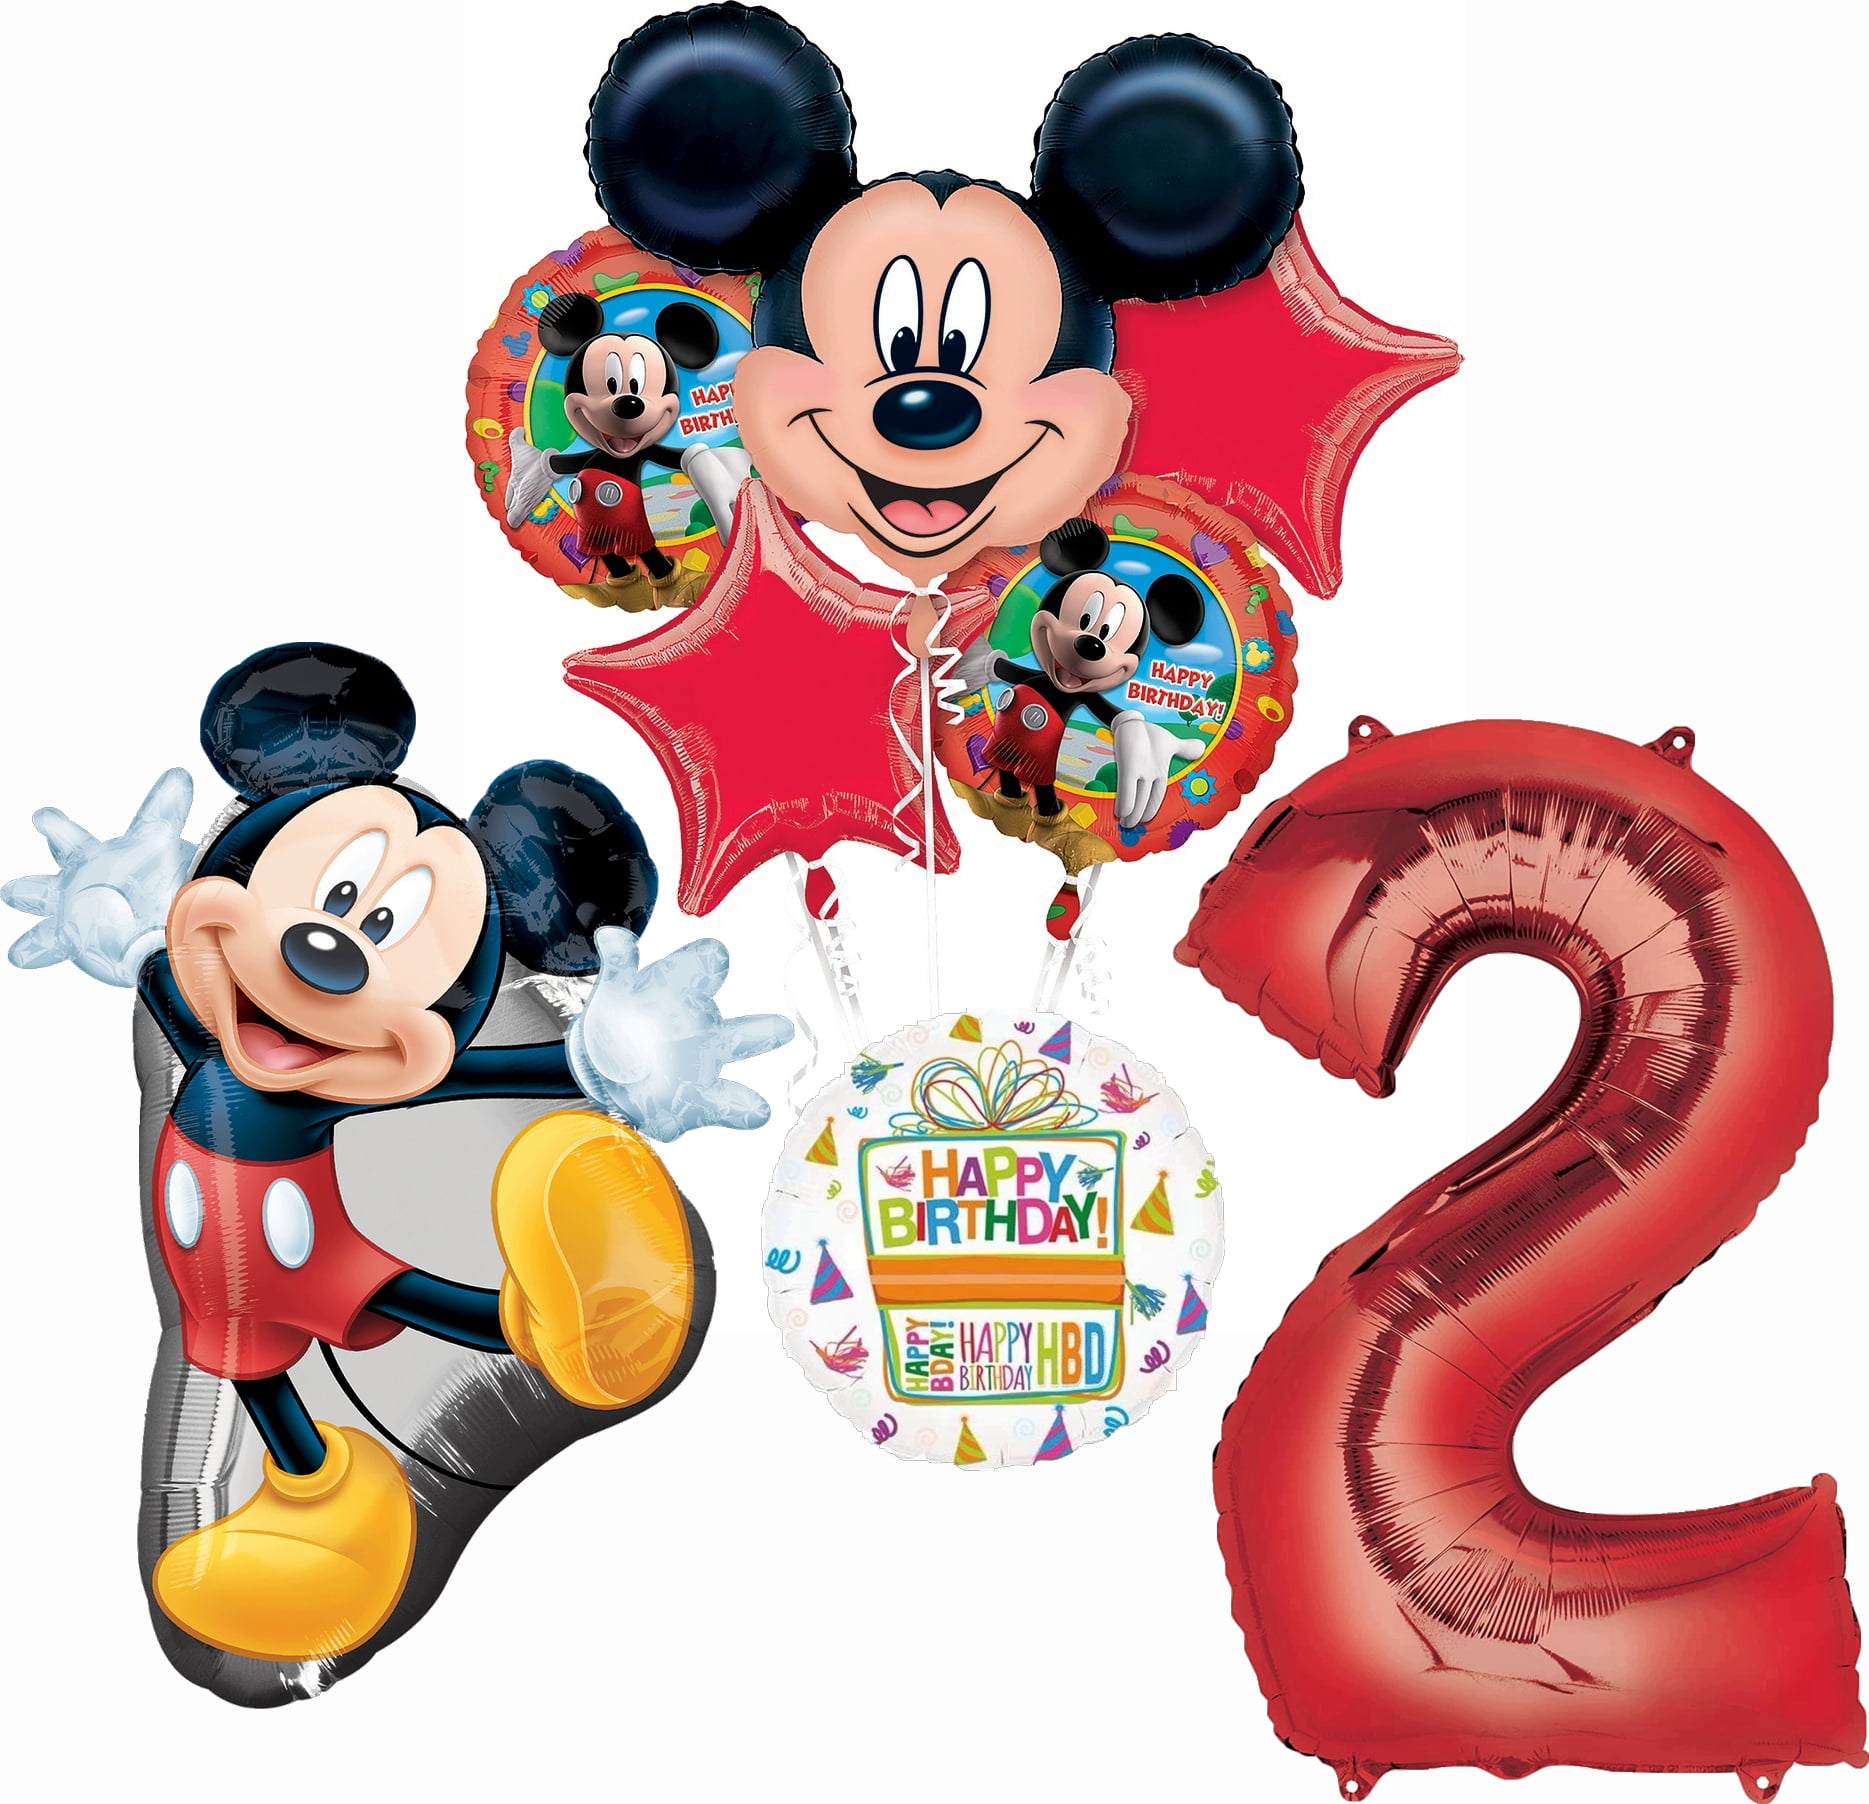 Anagram 26373 Mickey Full Body Supershape Foil Balloon 31 Multicolored